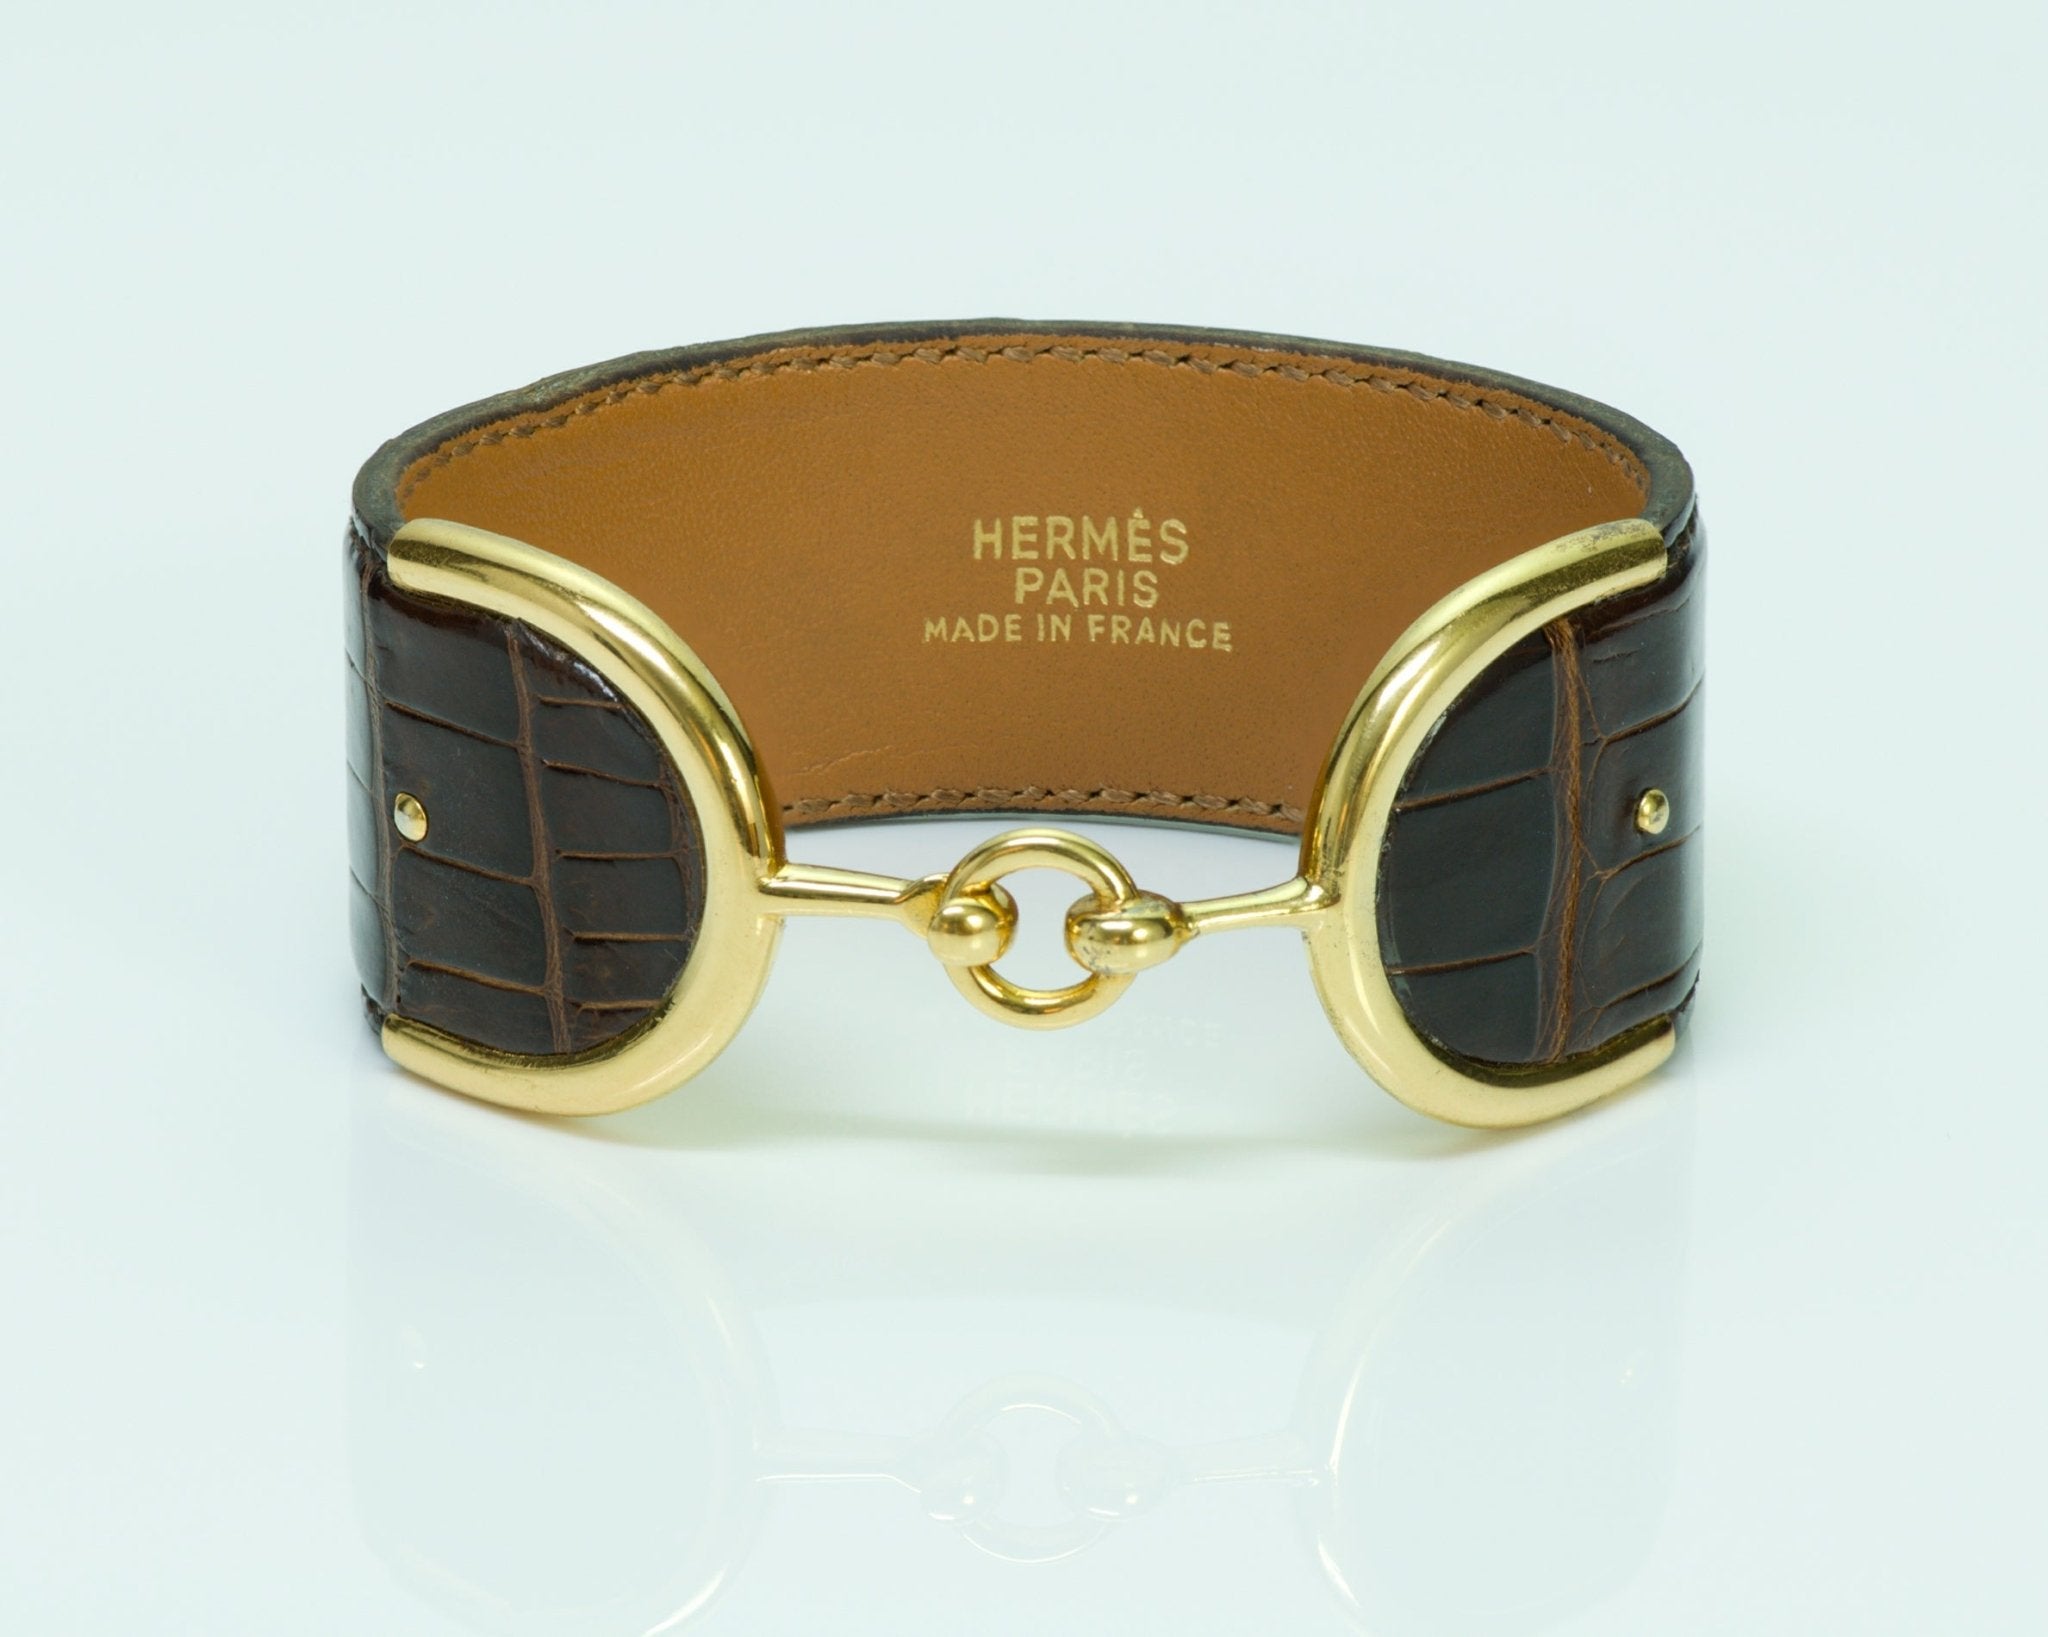 Why Hermès Jewelry Pieces Cost What They Do - DSF Antique Jewelry